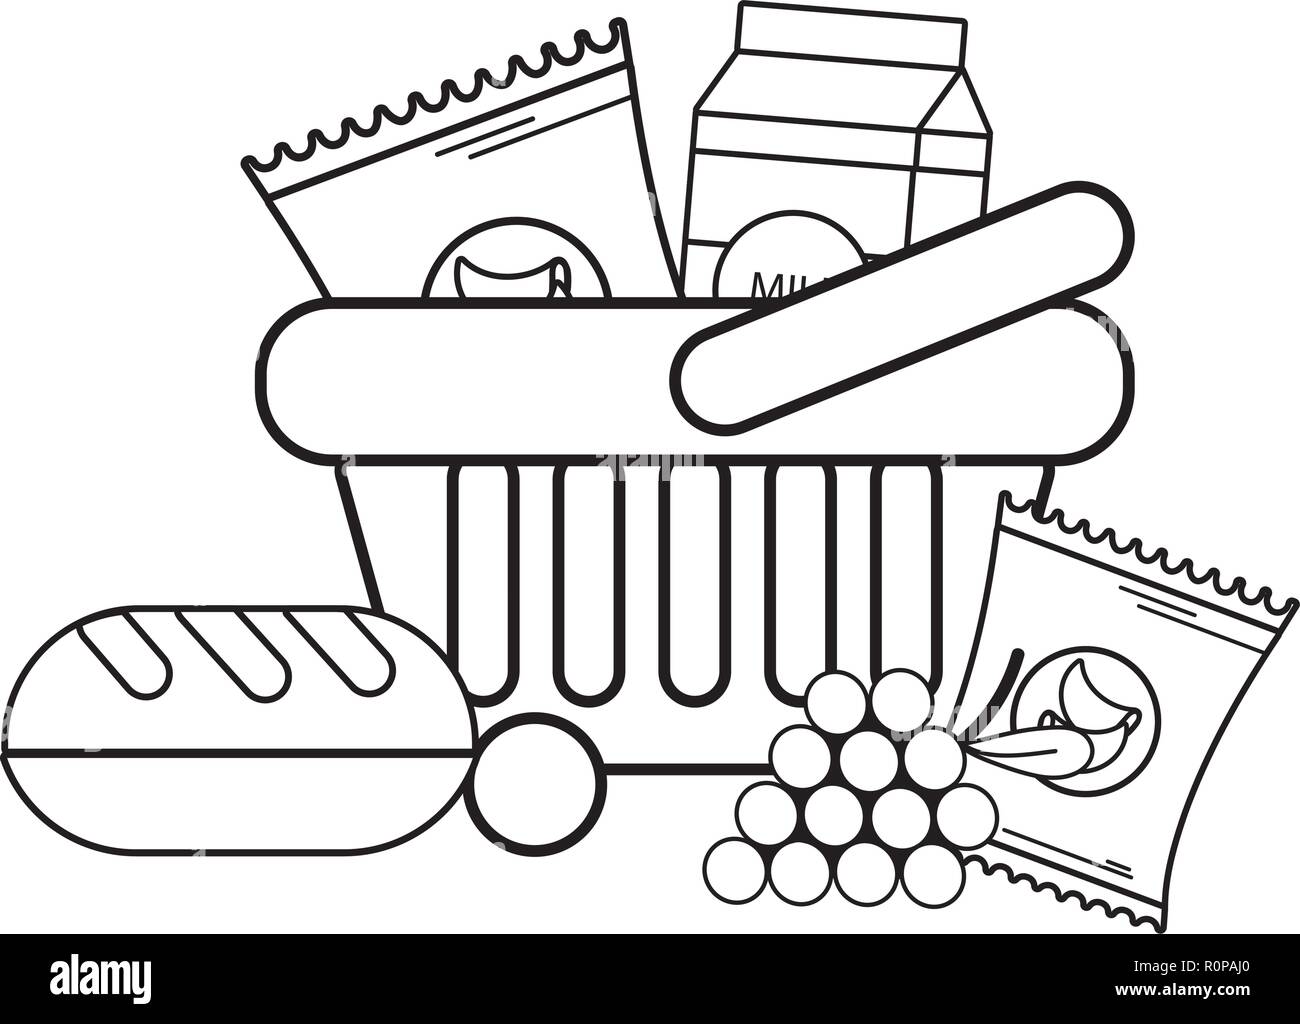 supermarket grocery products cartoon Stock Vector